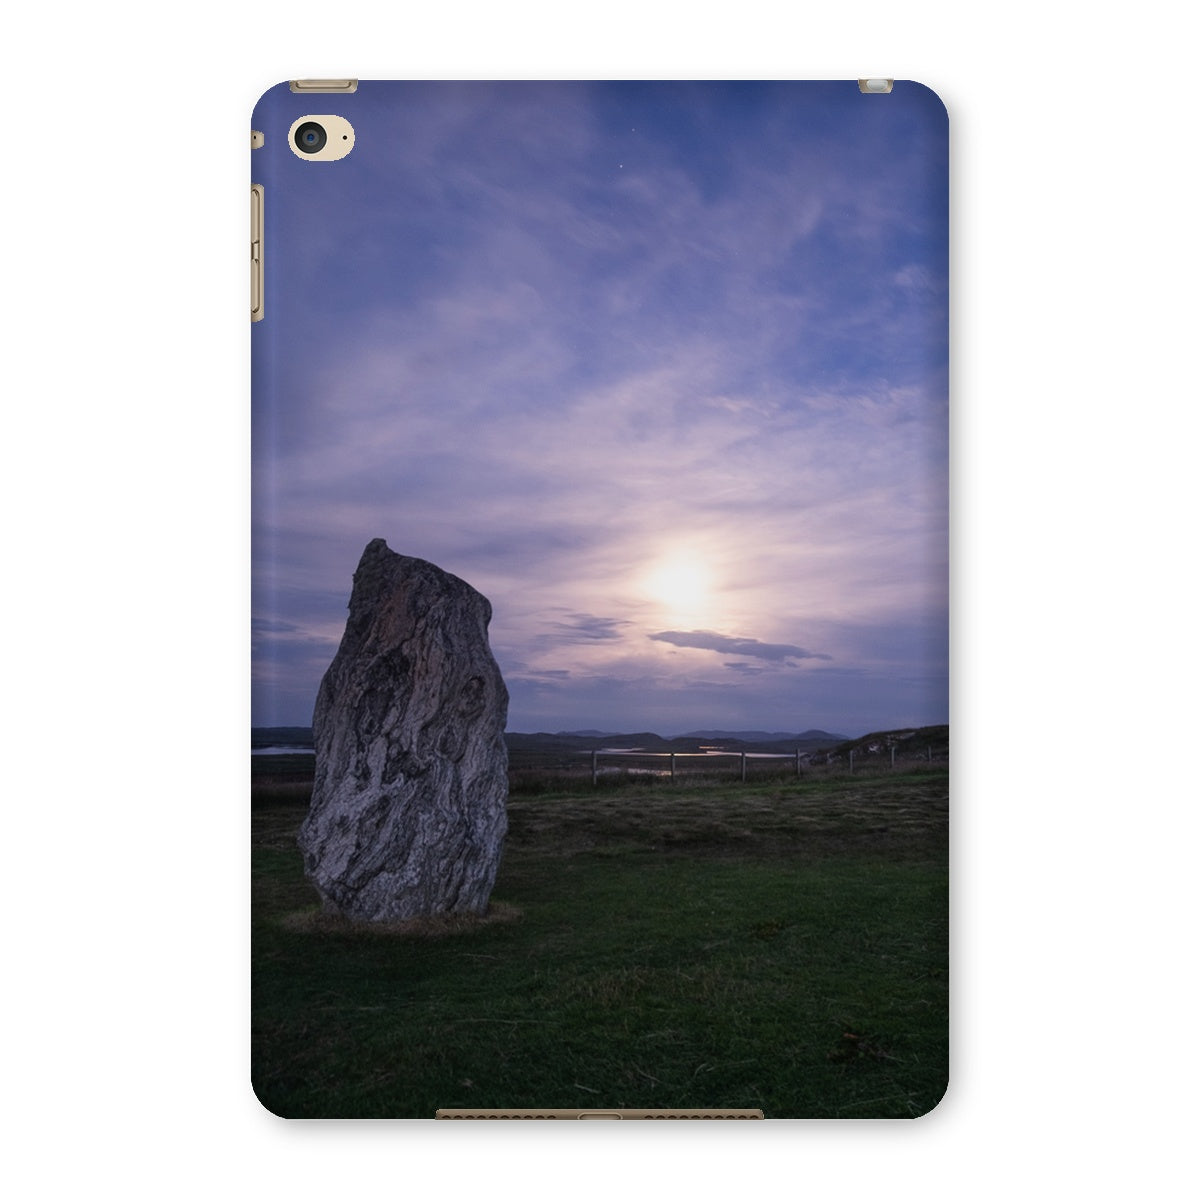 Callanish, Cailleach na Monteach and the Moon Tablet Cases